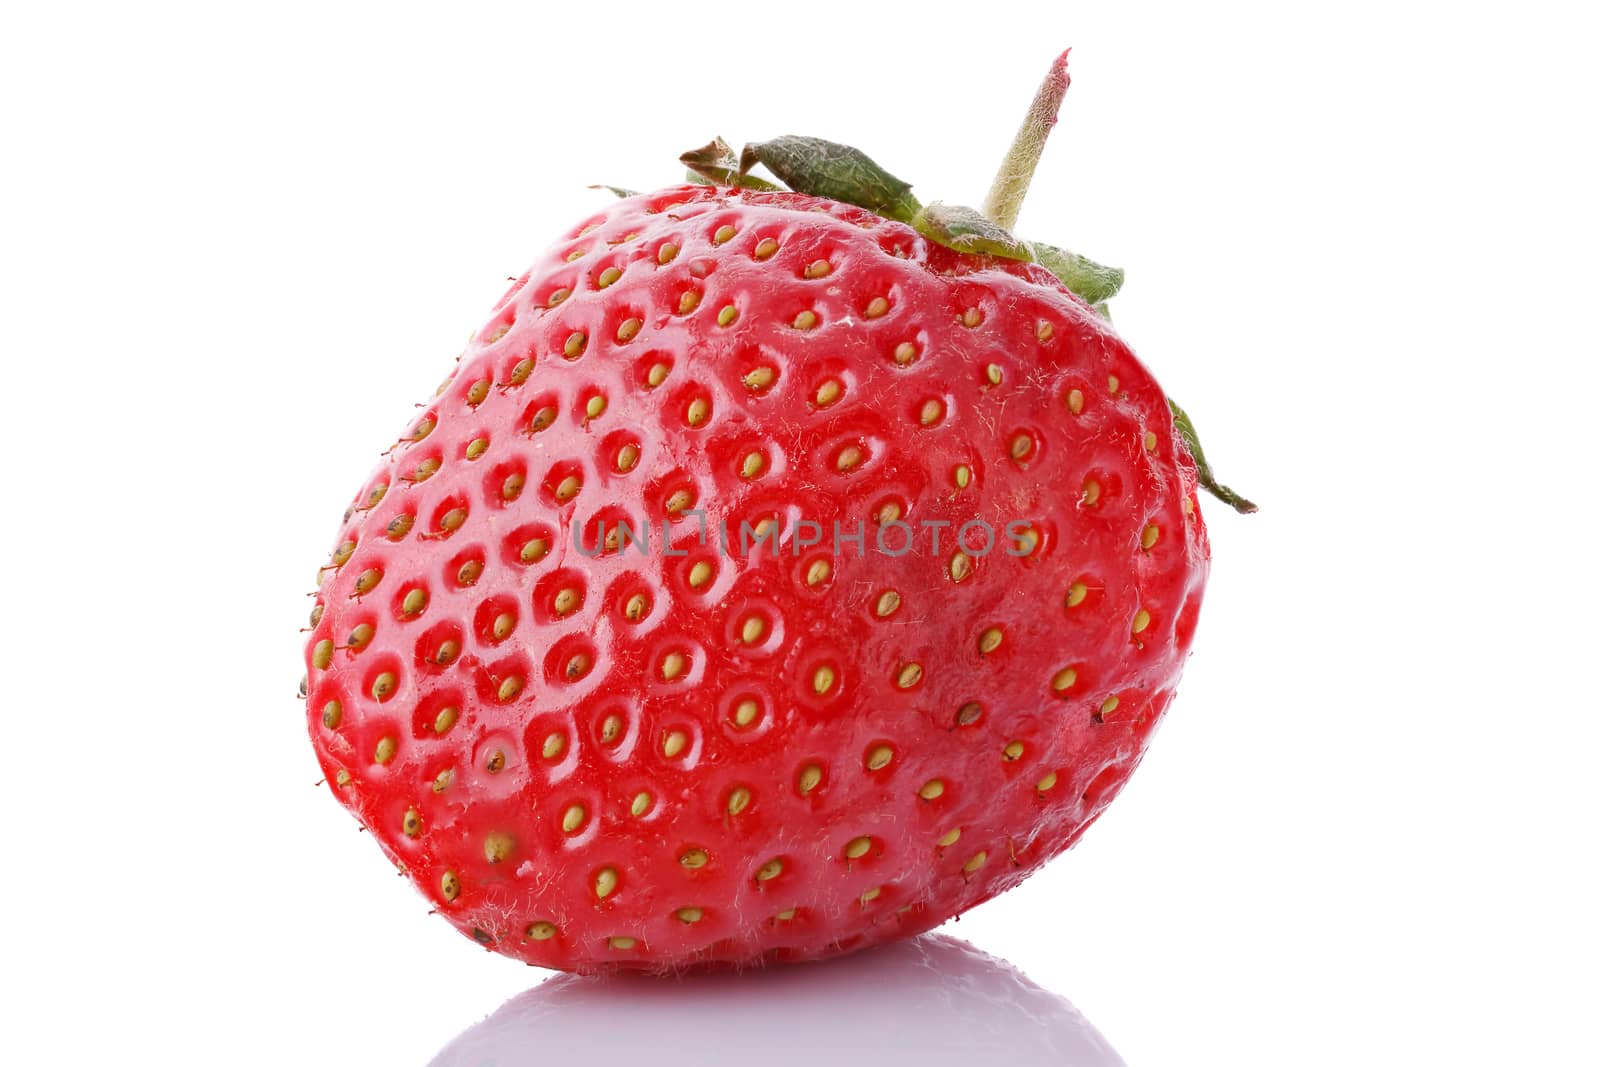 Ripe strawberries on a white background.